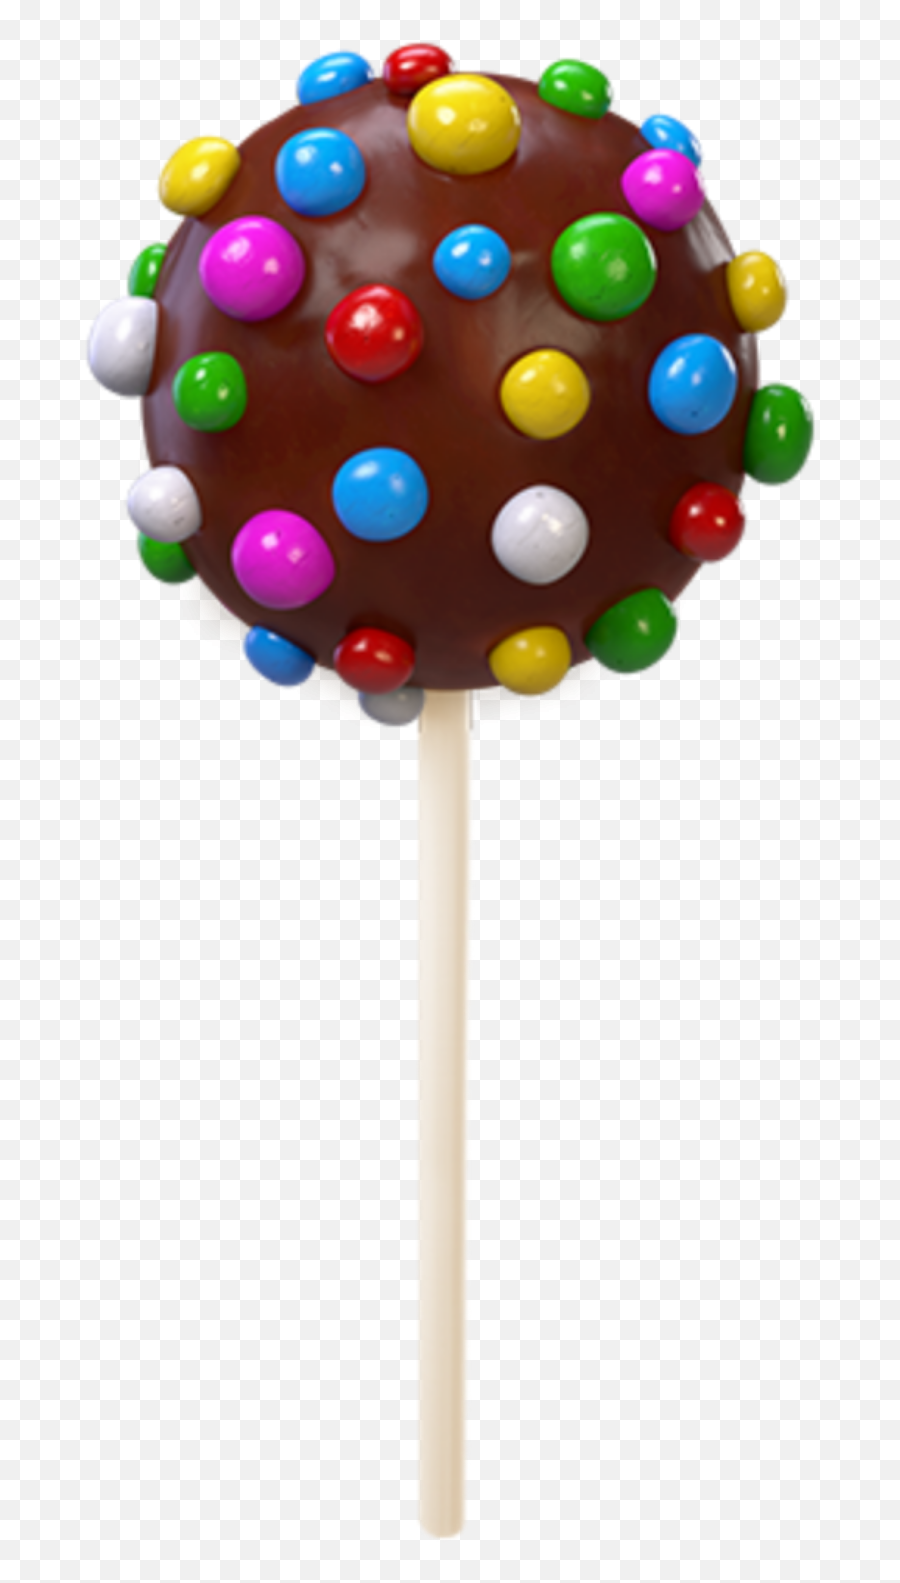 How About Color Bomb Lolipop U2014 King Community - Candy Crush Color Bomb Png,Lolipop Png